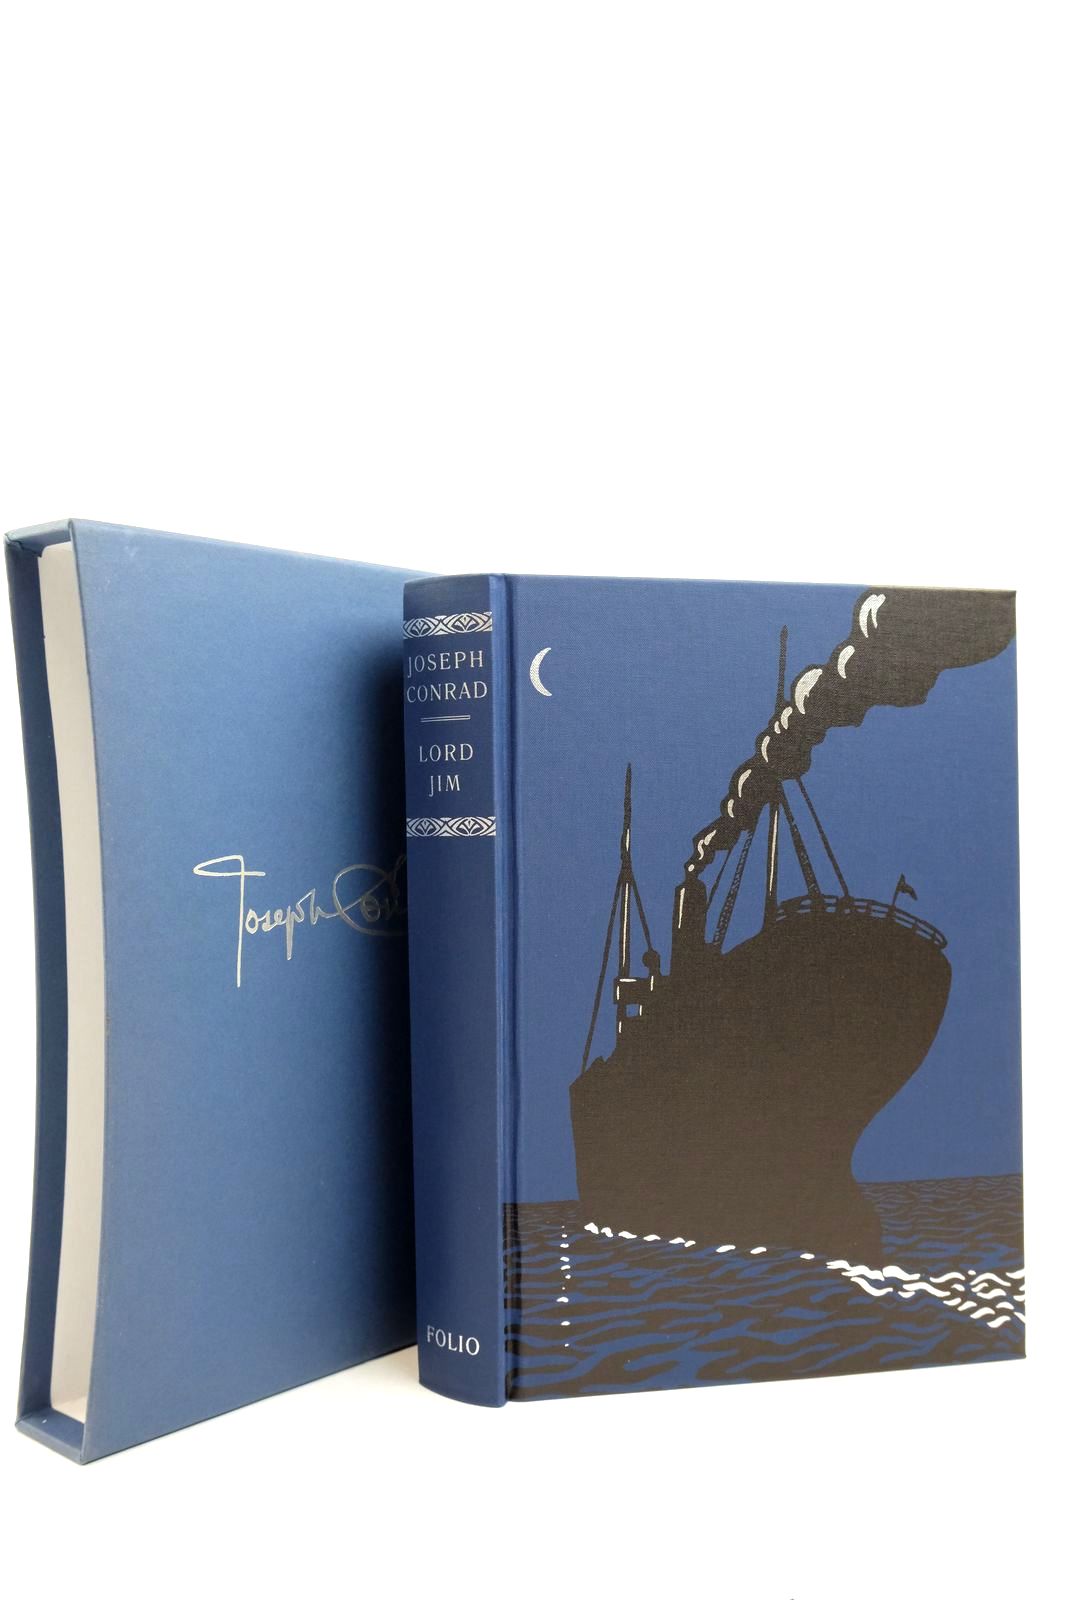 Photo of LORD JIM: A TALE written by Conrad, Joseph Young, Gavin illustrated by Mosley, Francis published by Folio Society (STOCK CODE: 2139217)  for sale by Stella & Rose's Books